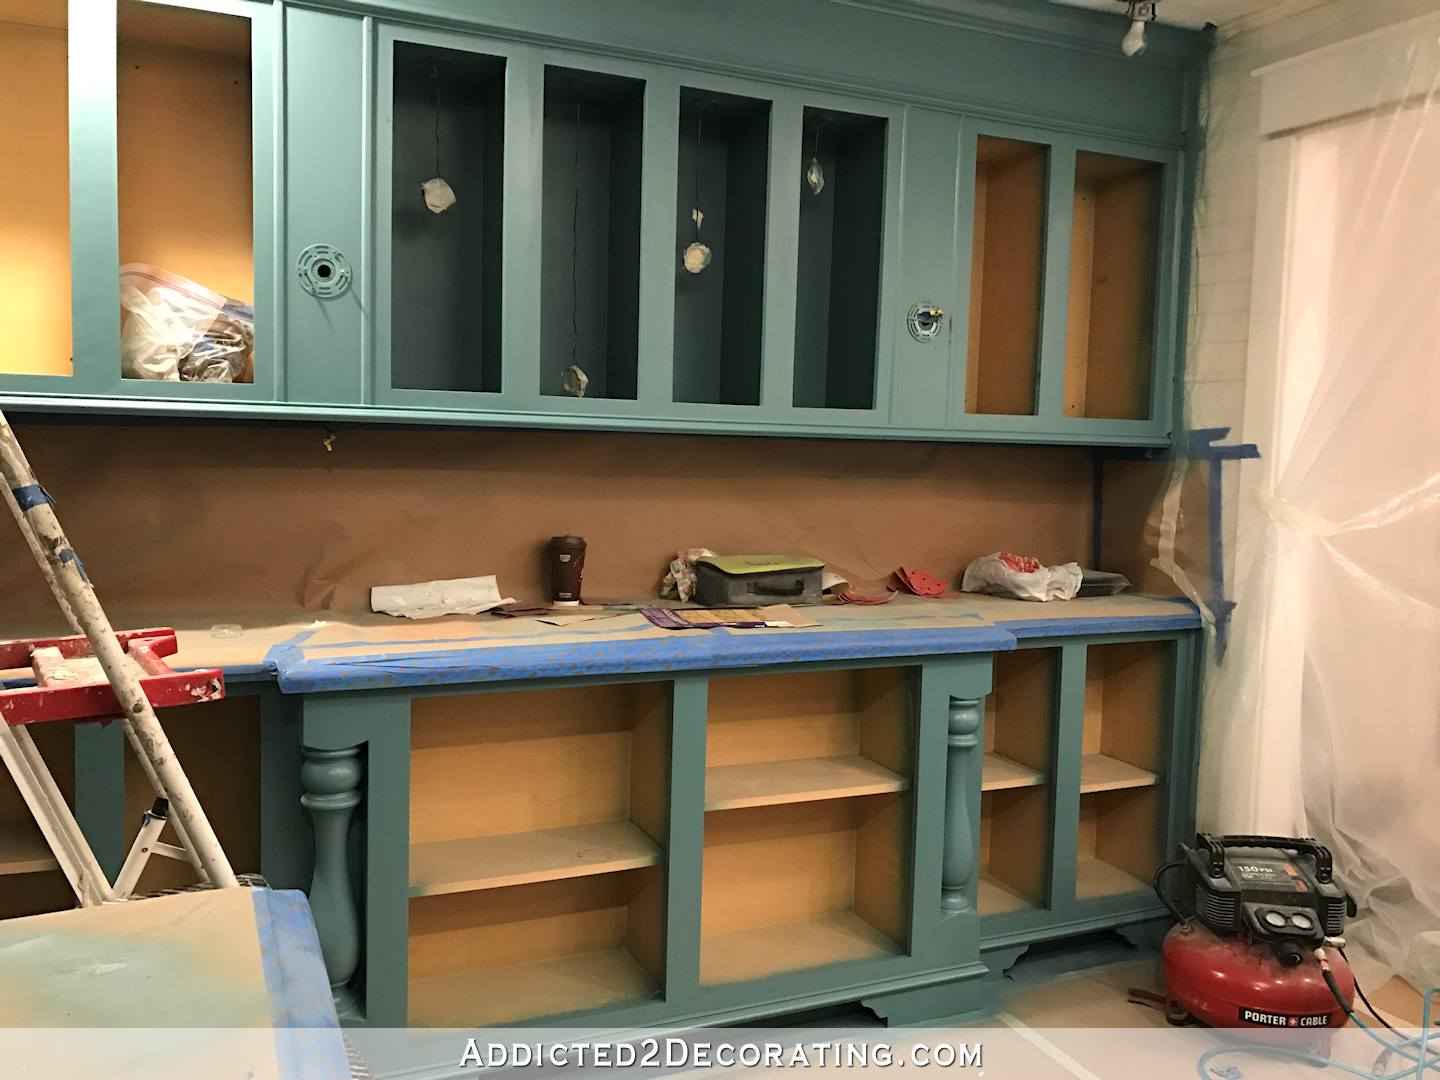 Kitchen Cabinet Progress — So Close To Being Finished!